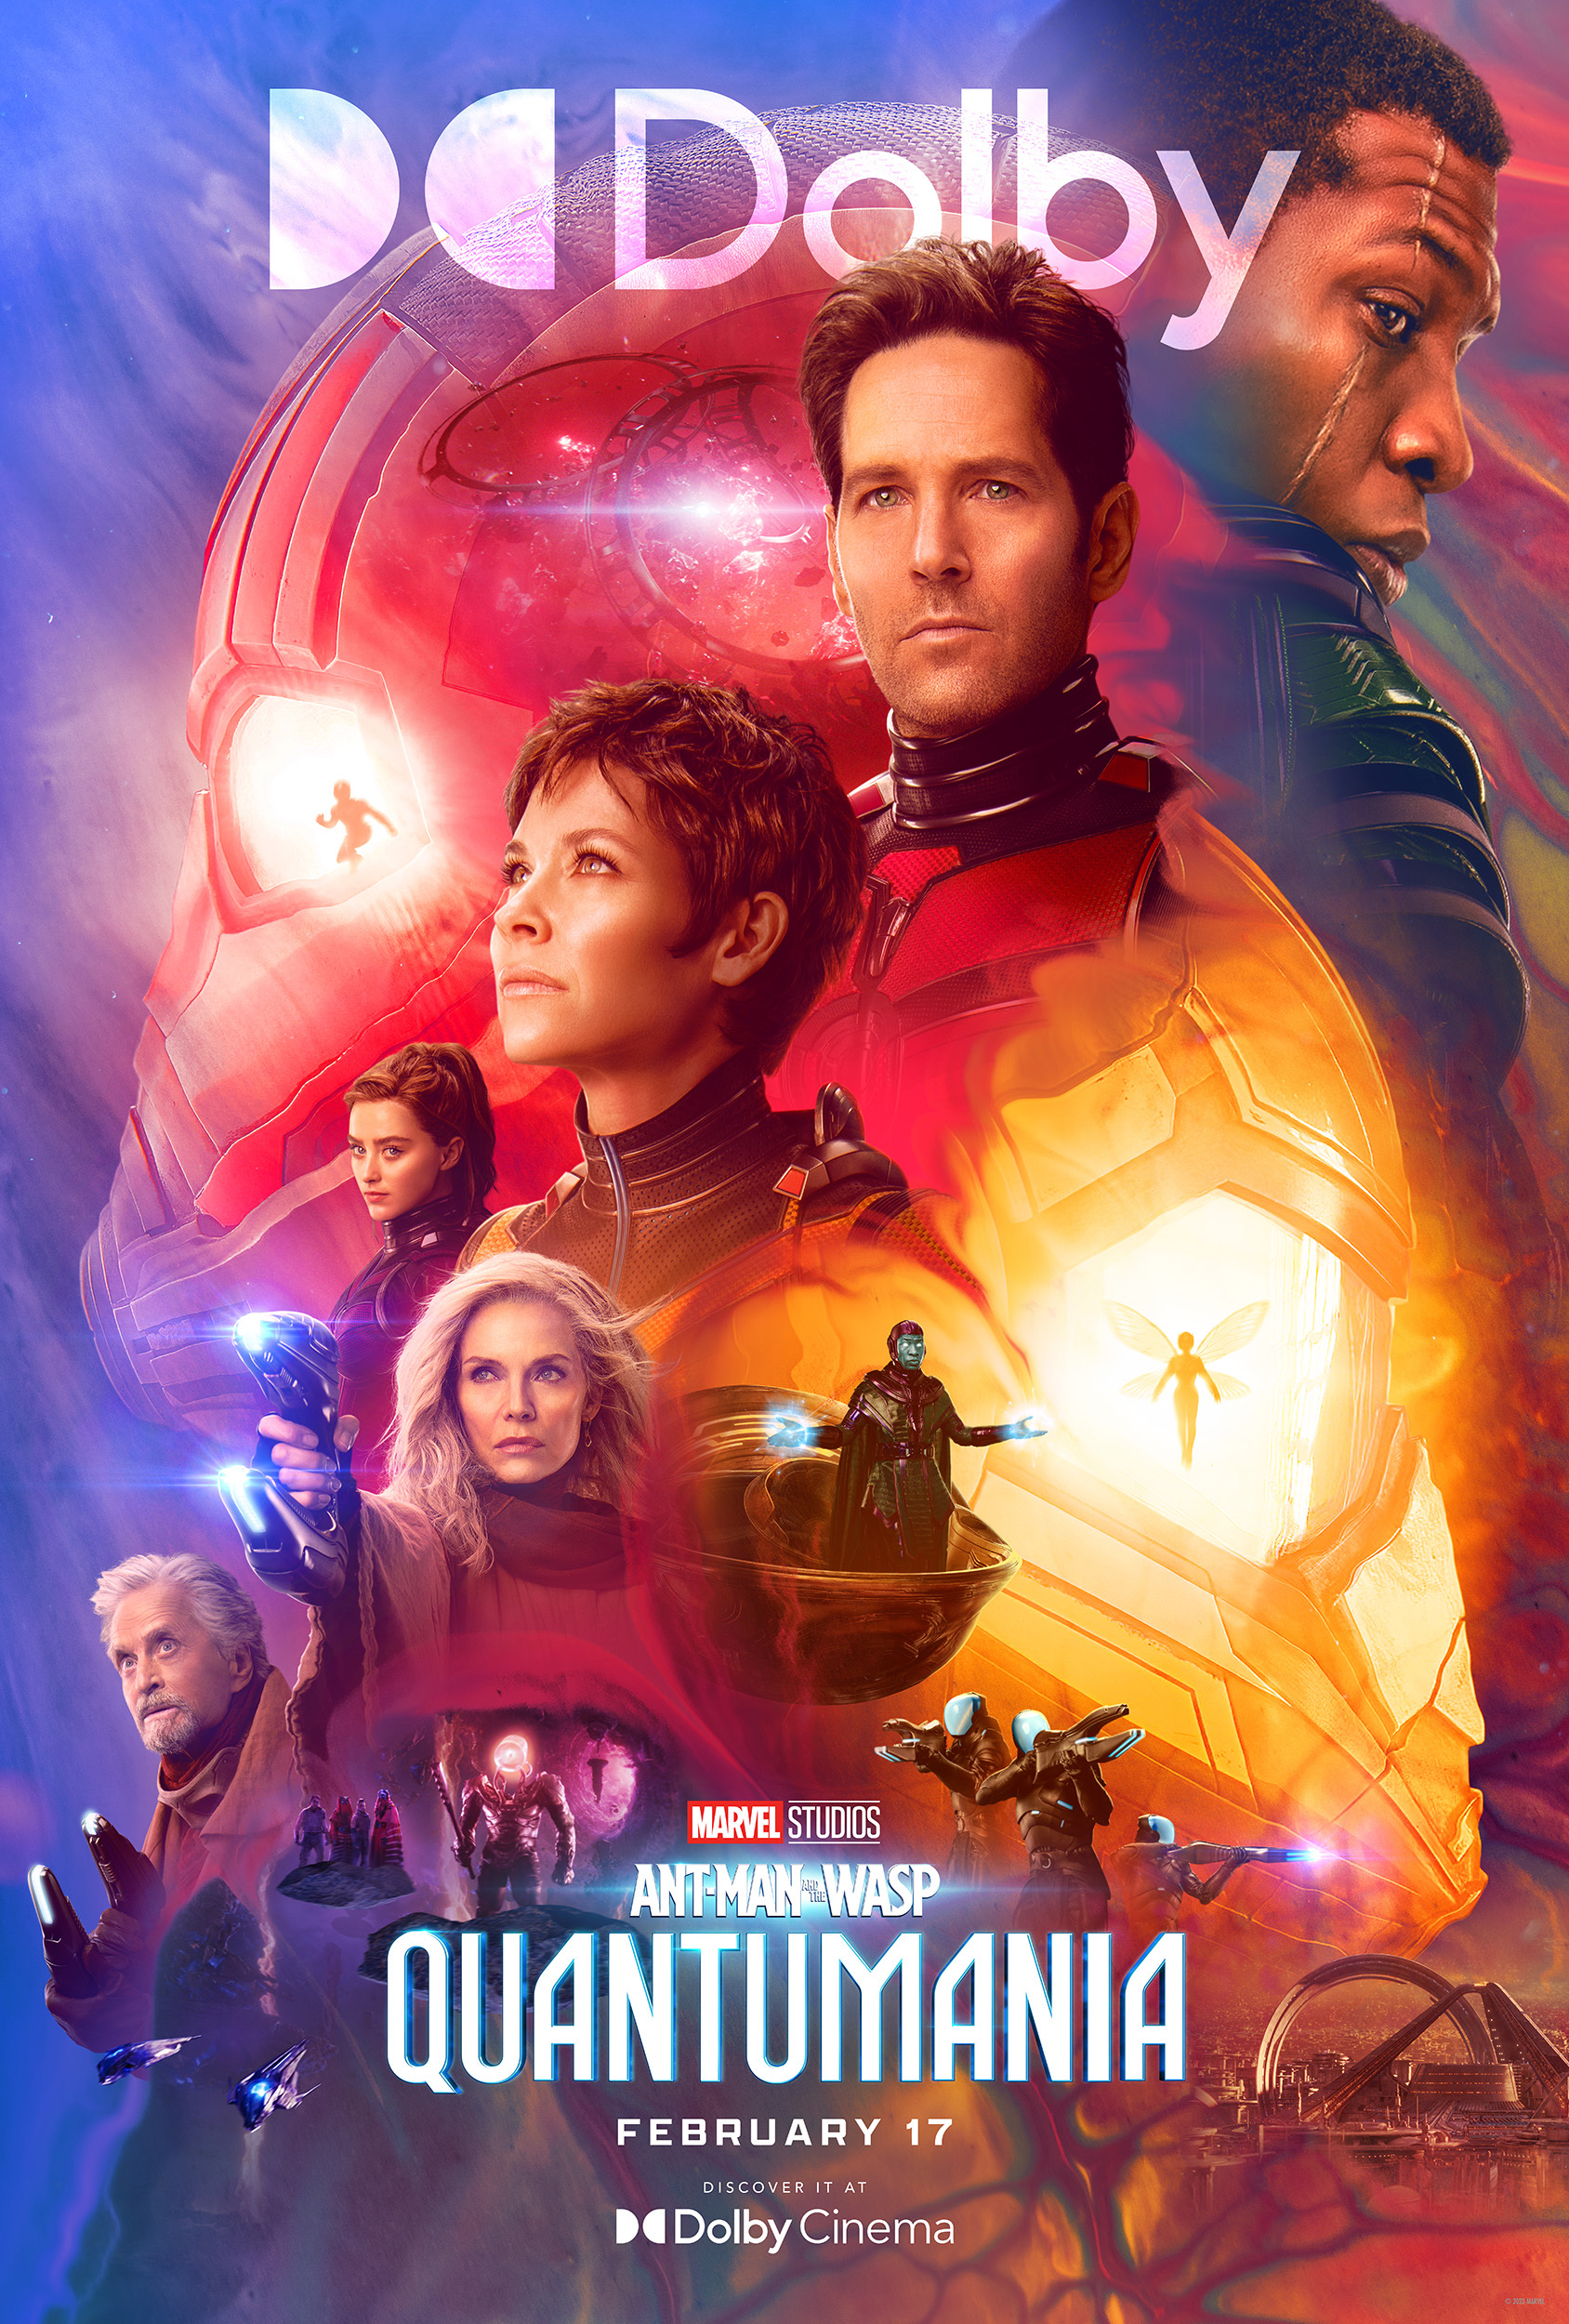 Ant-Man and the Wasp Quantumania (2023)05 by DrDarkDoom on DeviantArt